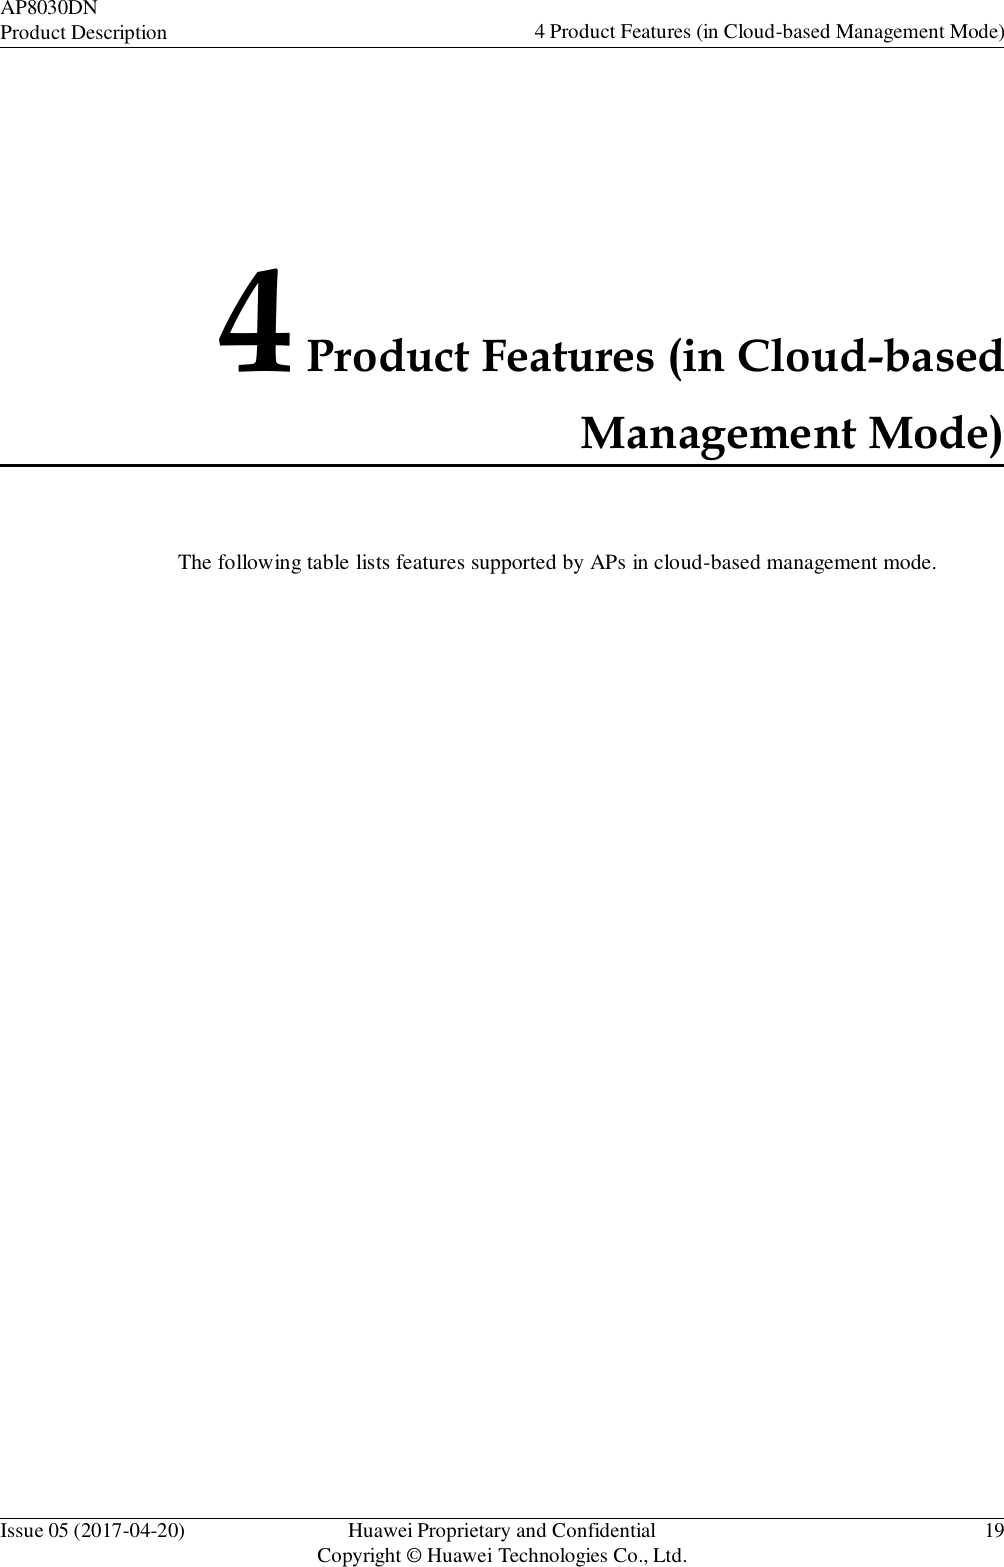 Issue 05 (2017-04-20) Huawei Proprietary and Confidential Copyright © Huawei Technologies Co., Ltd. 19 AP8030DN Product Description 4 Product Features (in Cloud-based Management Mode)            4Product Features (in Cloud-based Management Mode)     The following table lists features supported by APs in cloud-based management mode. 